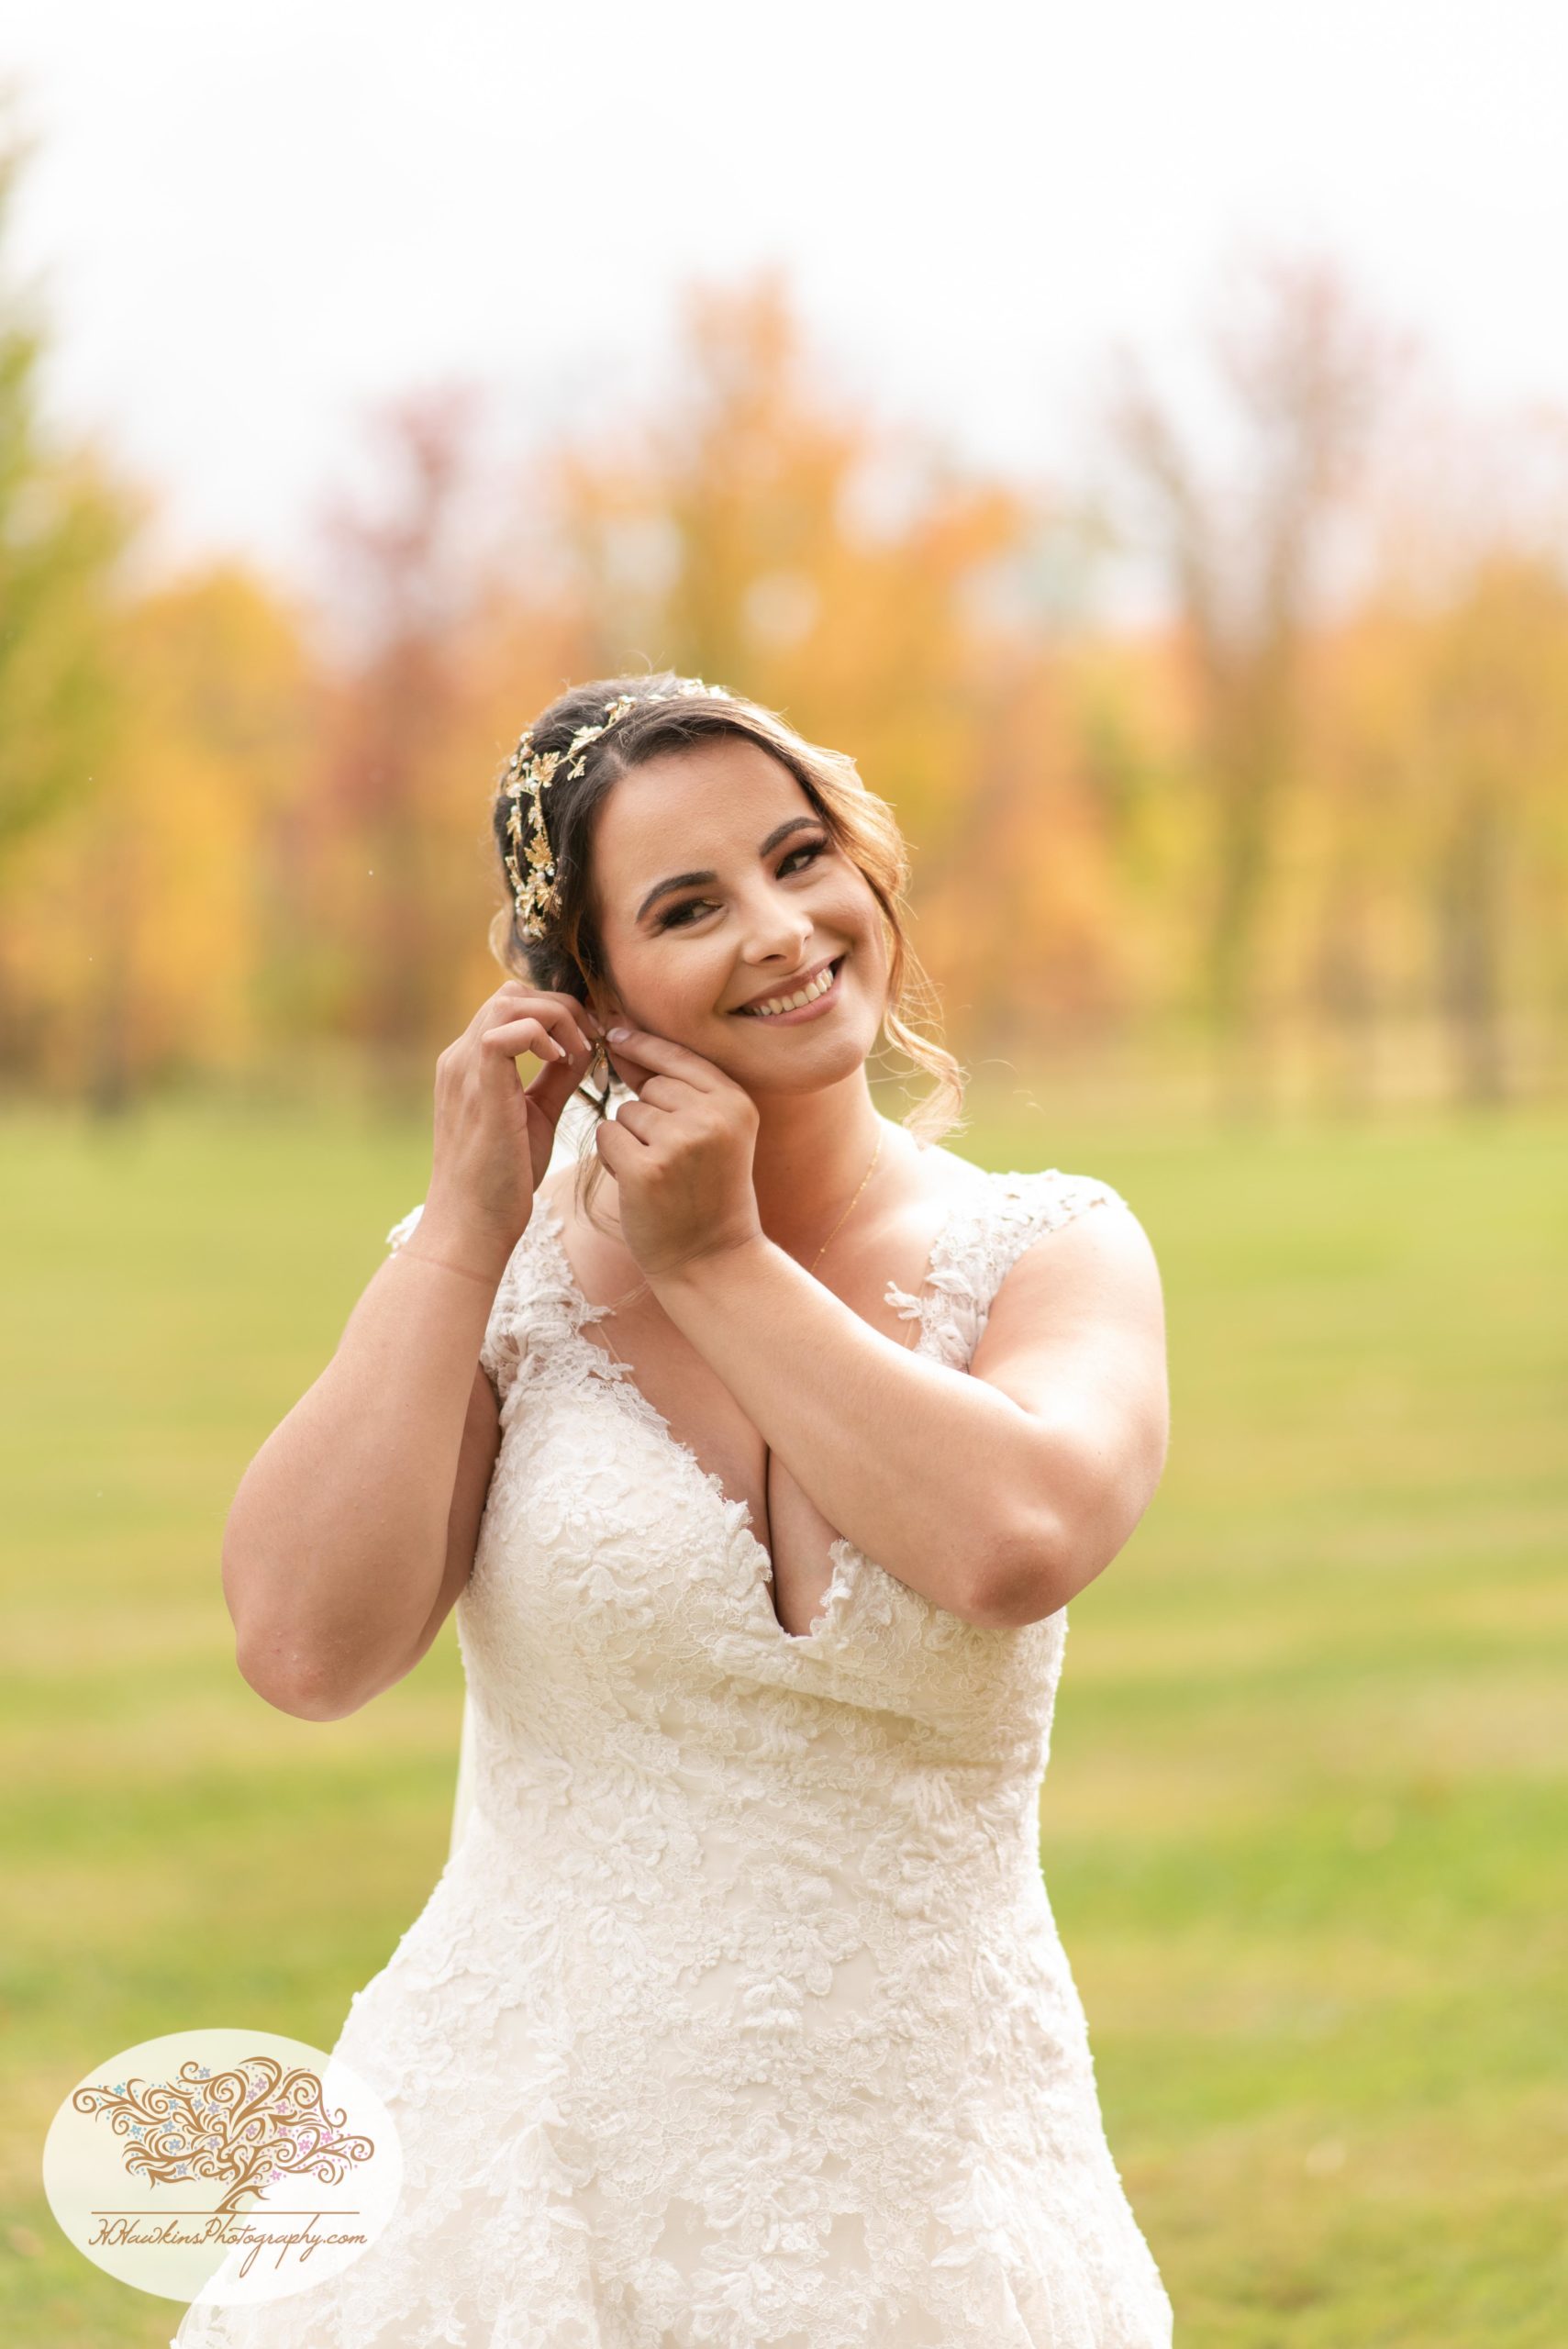 Bride puts her earrings in on her wedding day with fall foliage behind at Upstate NY barn wedding venue